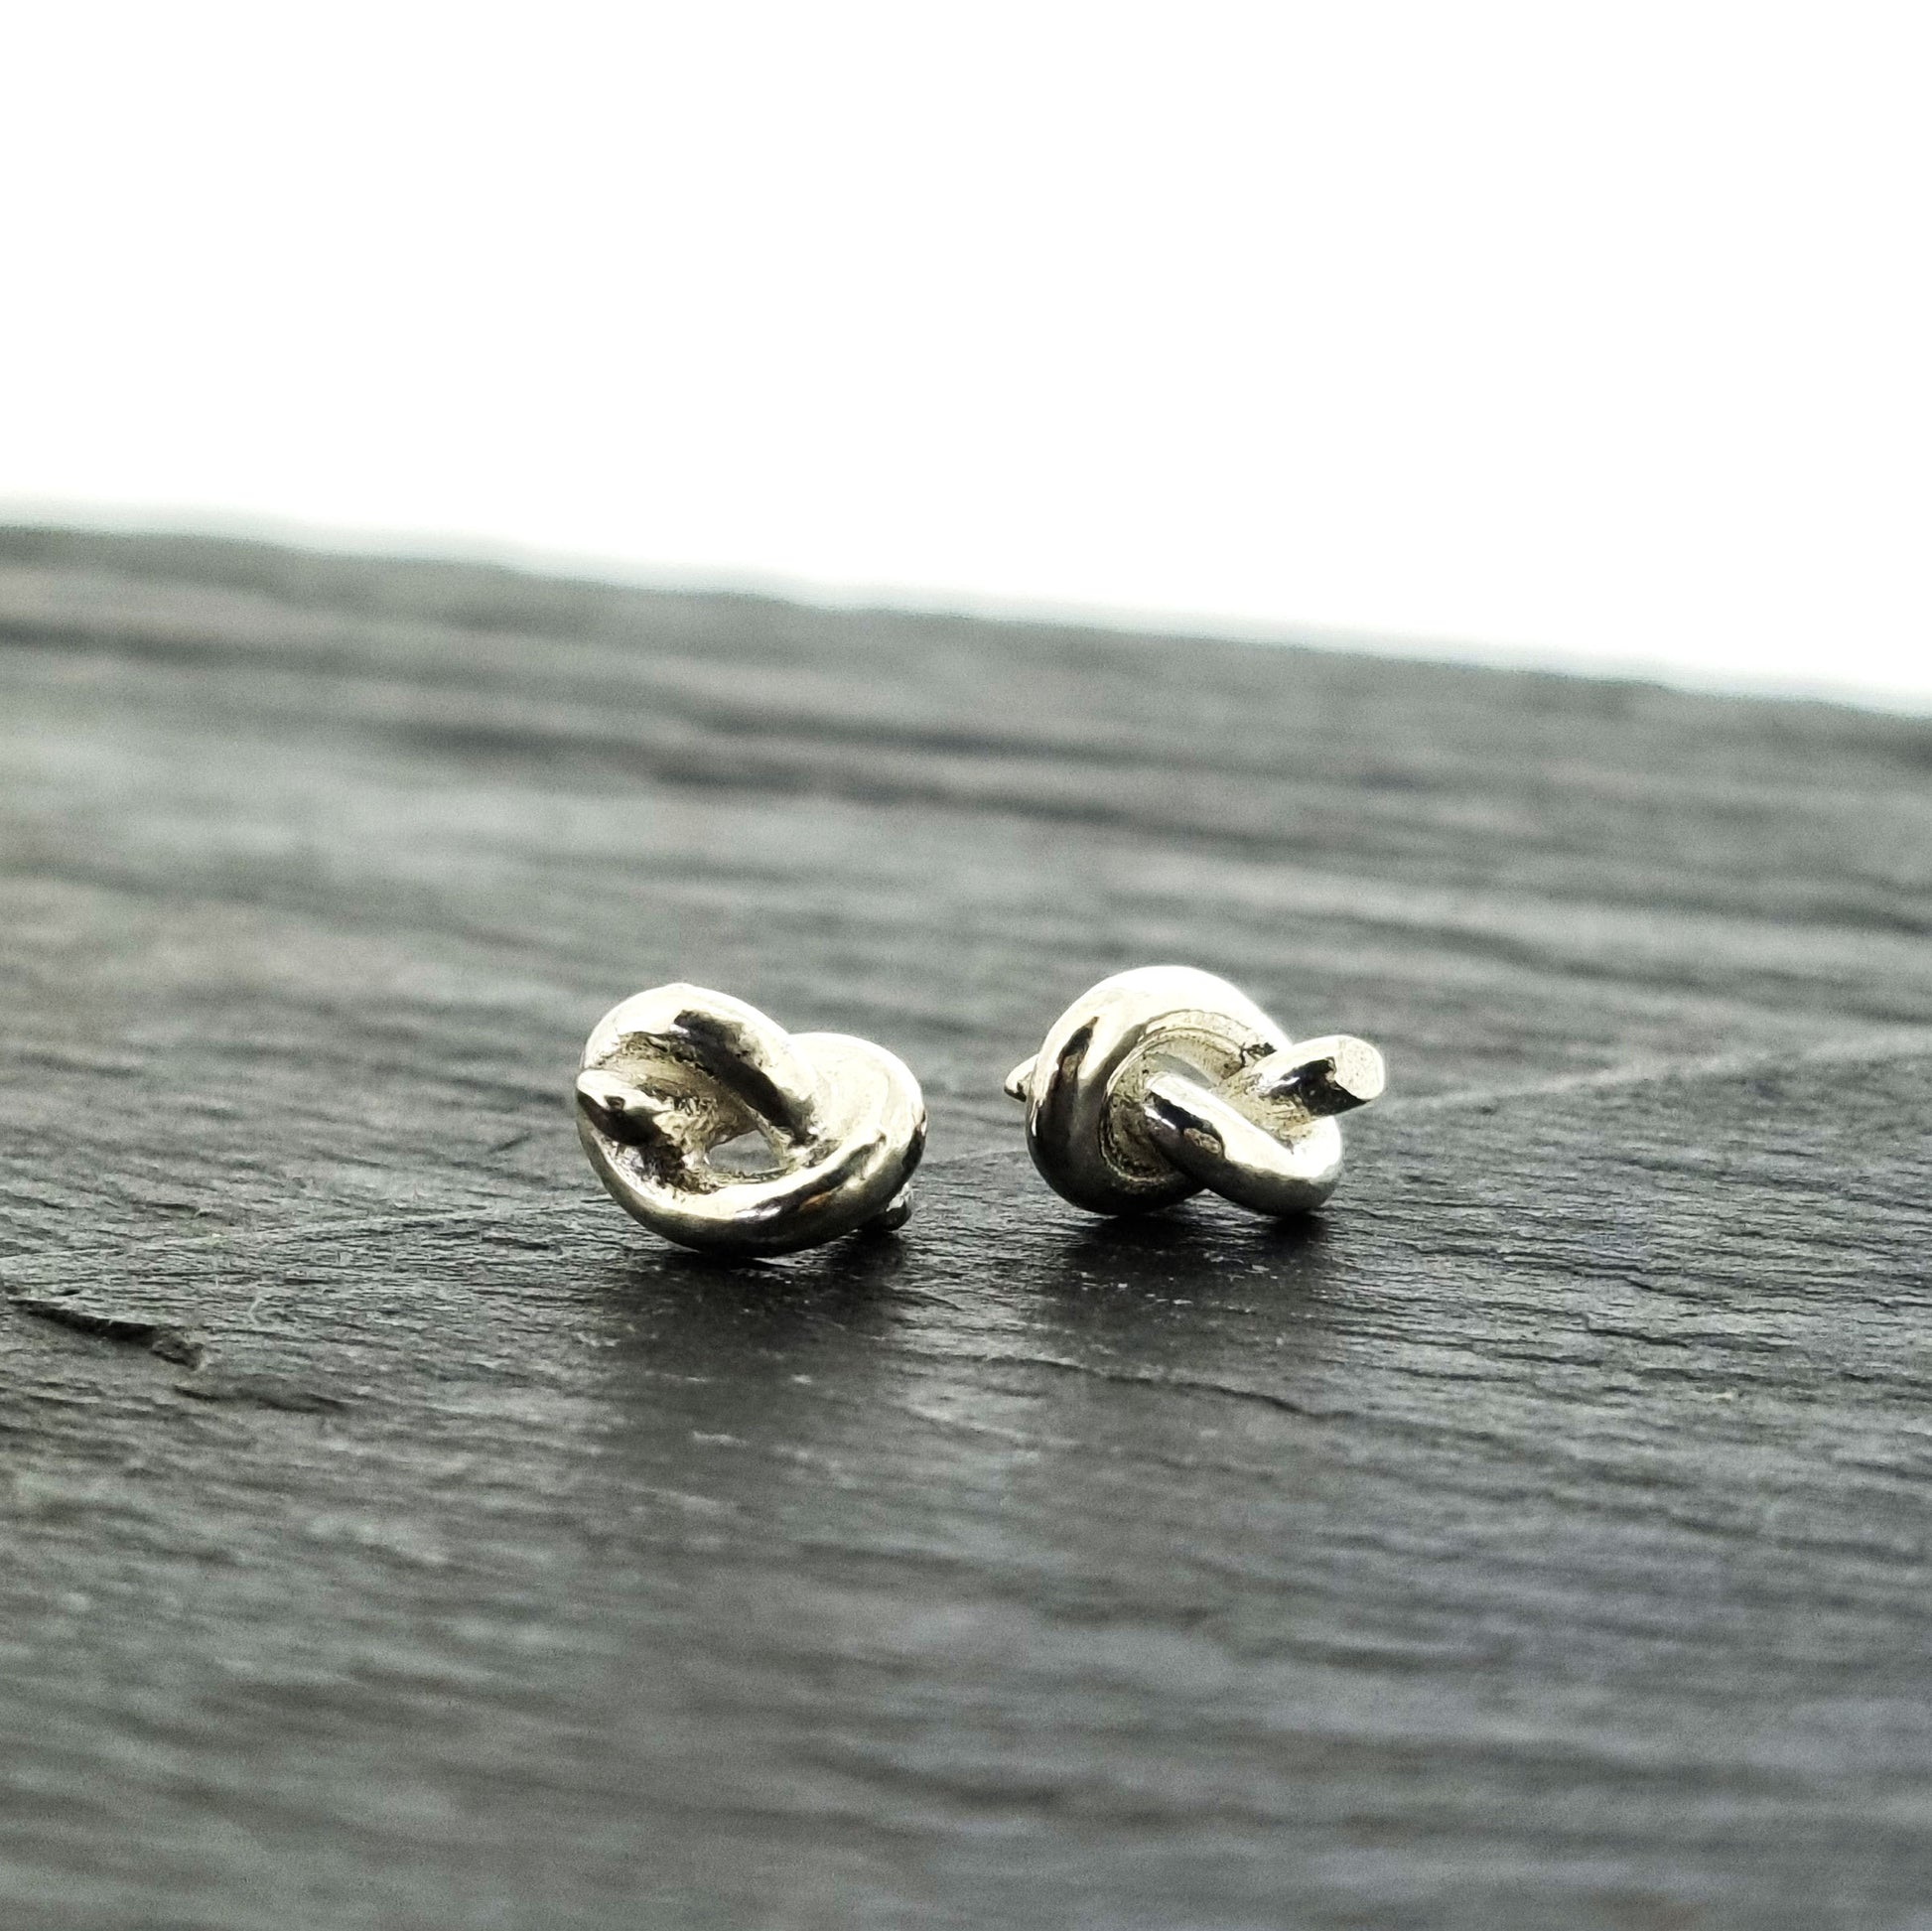 Silver stud earrings in the shape of a knot in a piece of string.